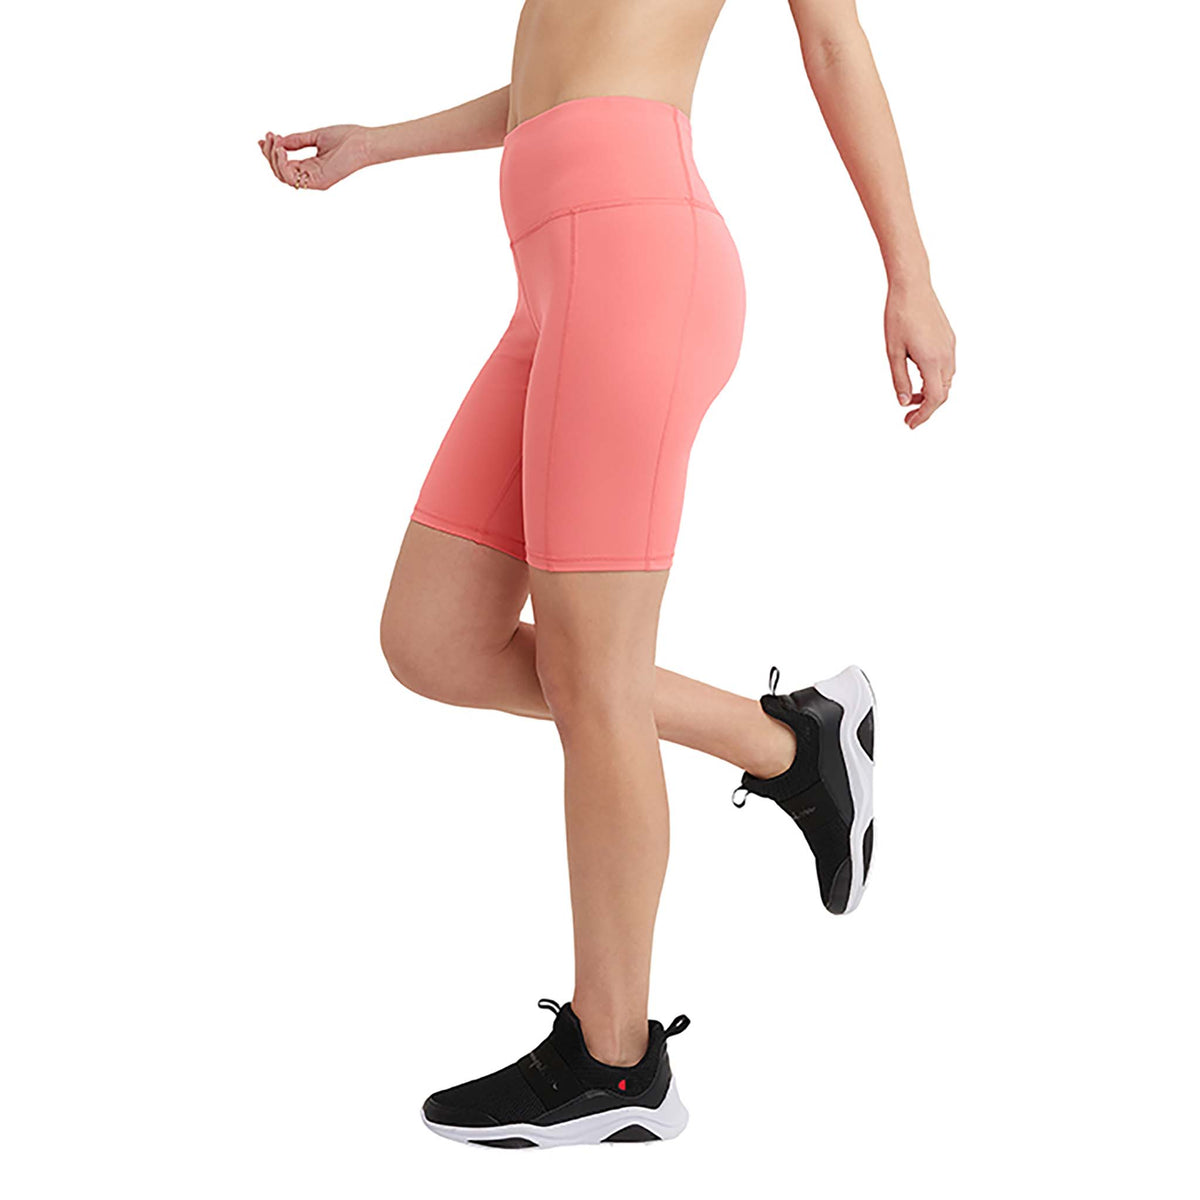 Champion Absolute Eco Bike Short de style cuissard femme pink peach lateral